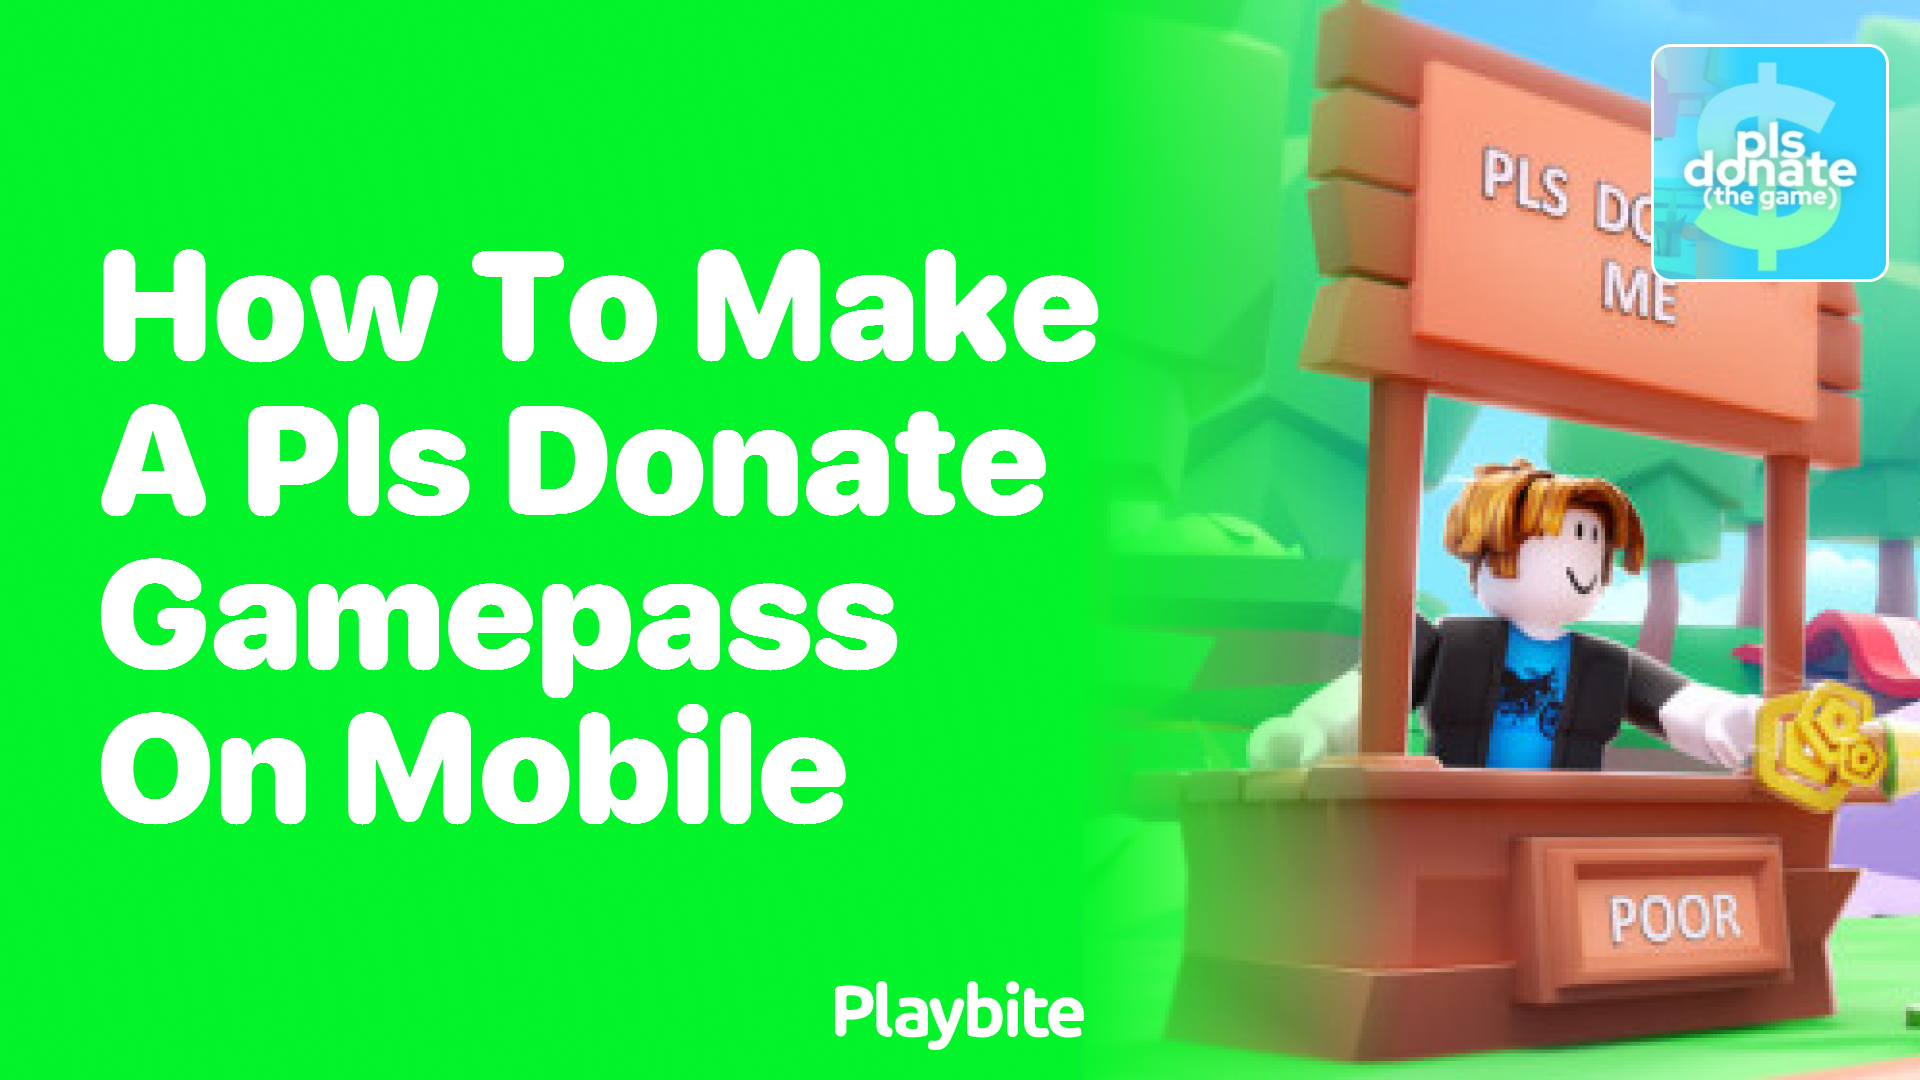 How to Make a PLS DONATE Gamepass on Mobile